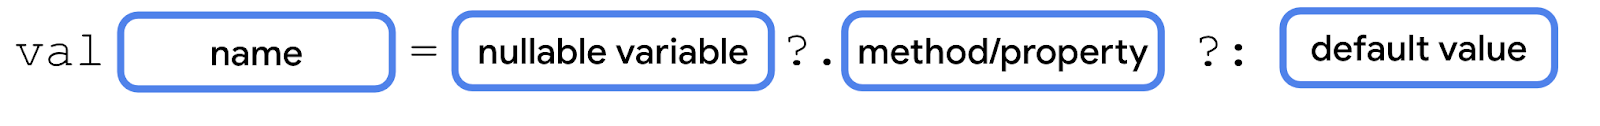 A diagram that shows the val keyword followed by a name block, an equal sign, a nullable variable block, a question mark, a dot, a method or property block, a question mark, a colon, and a default value block.